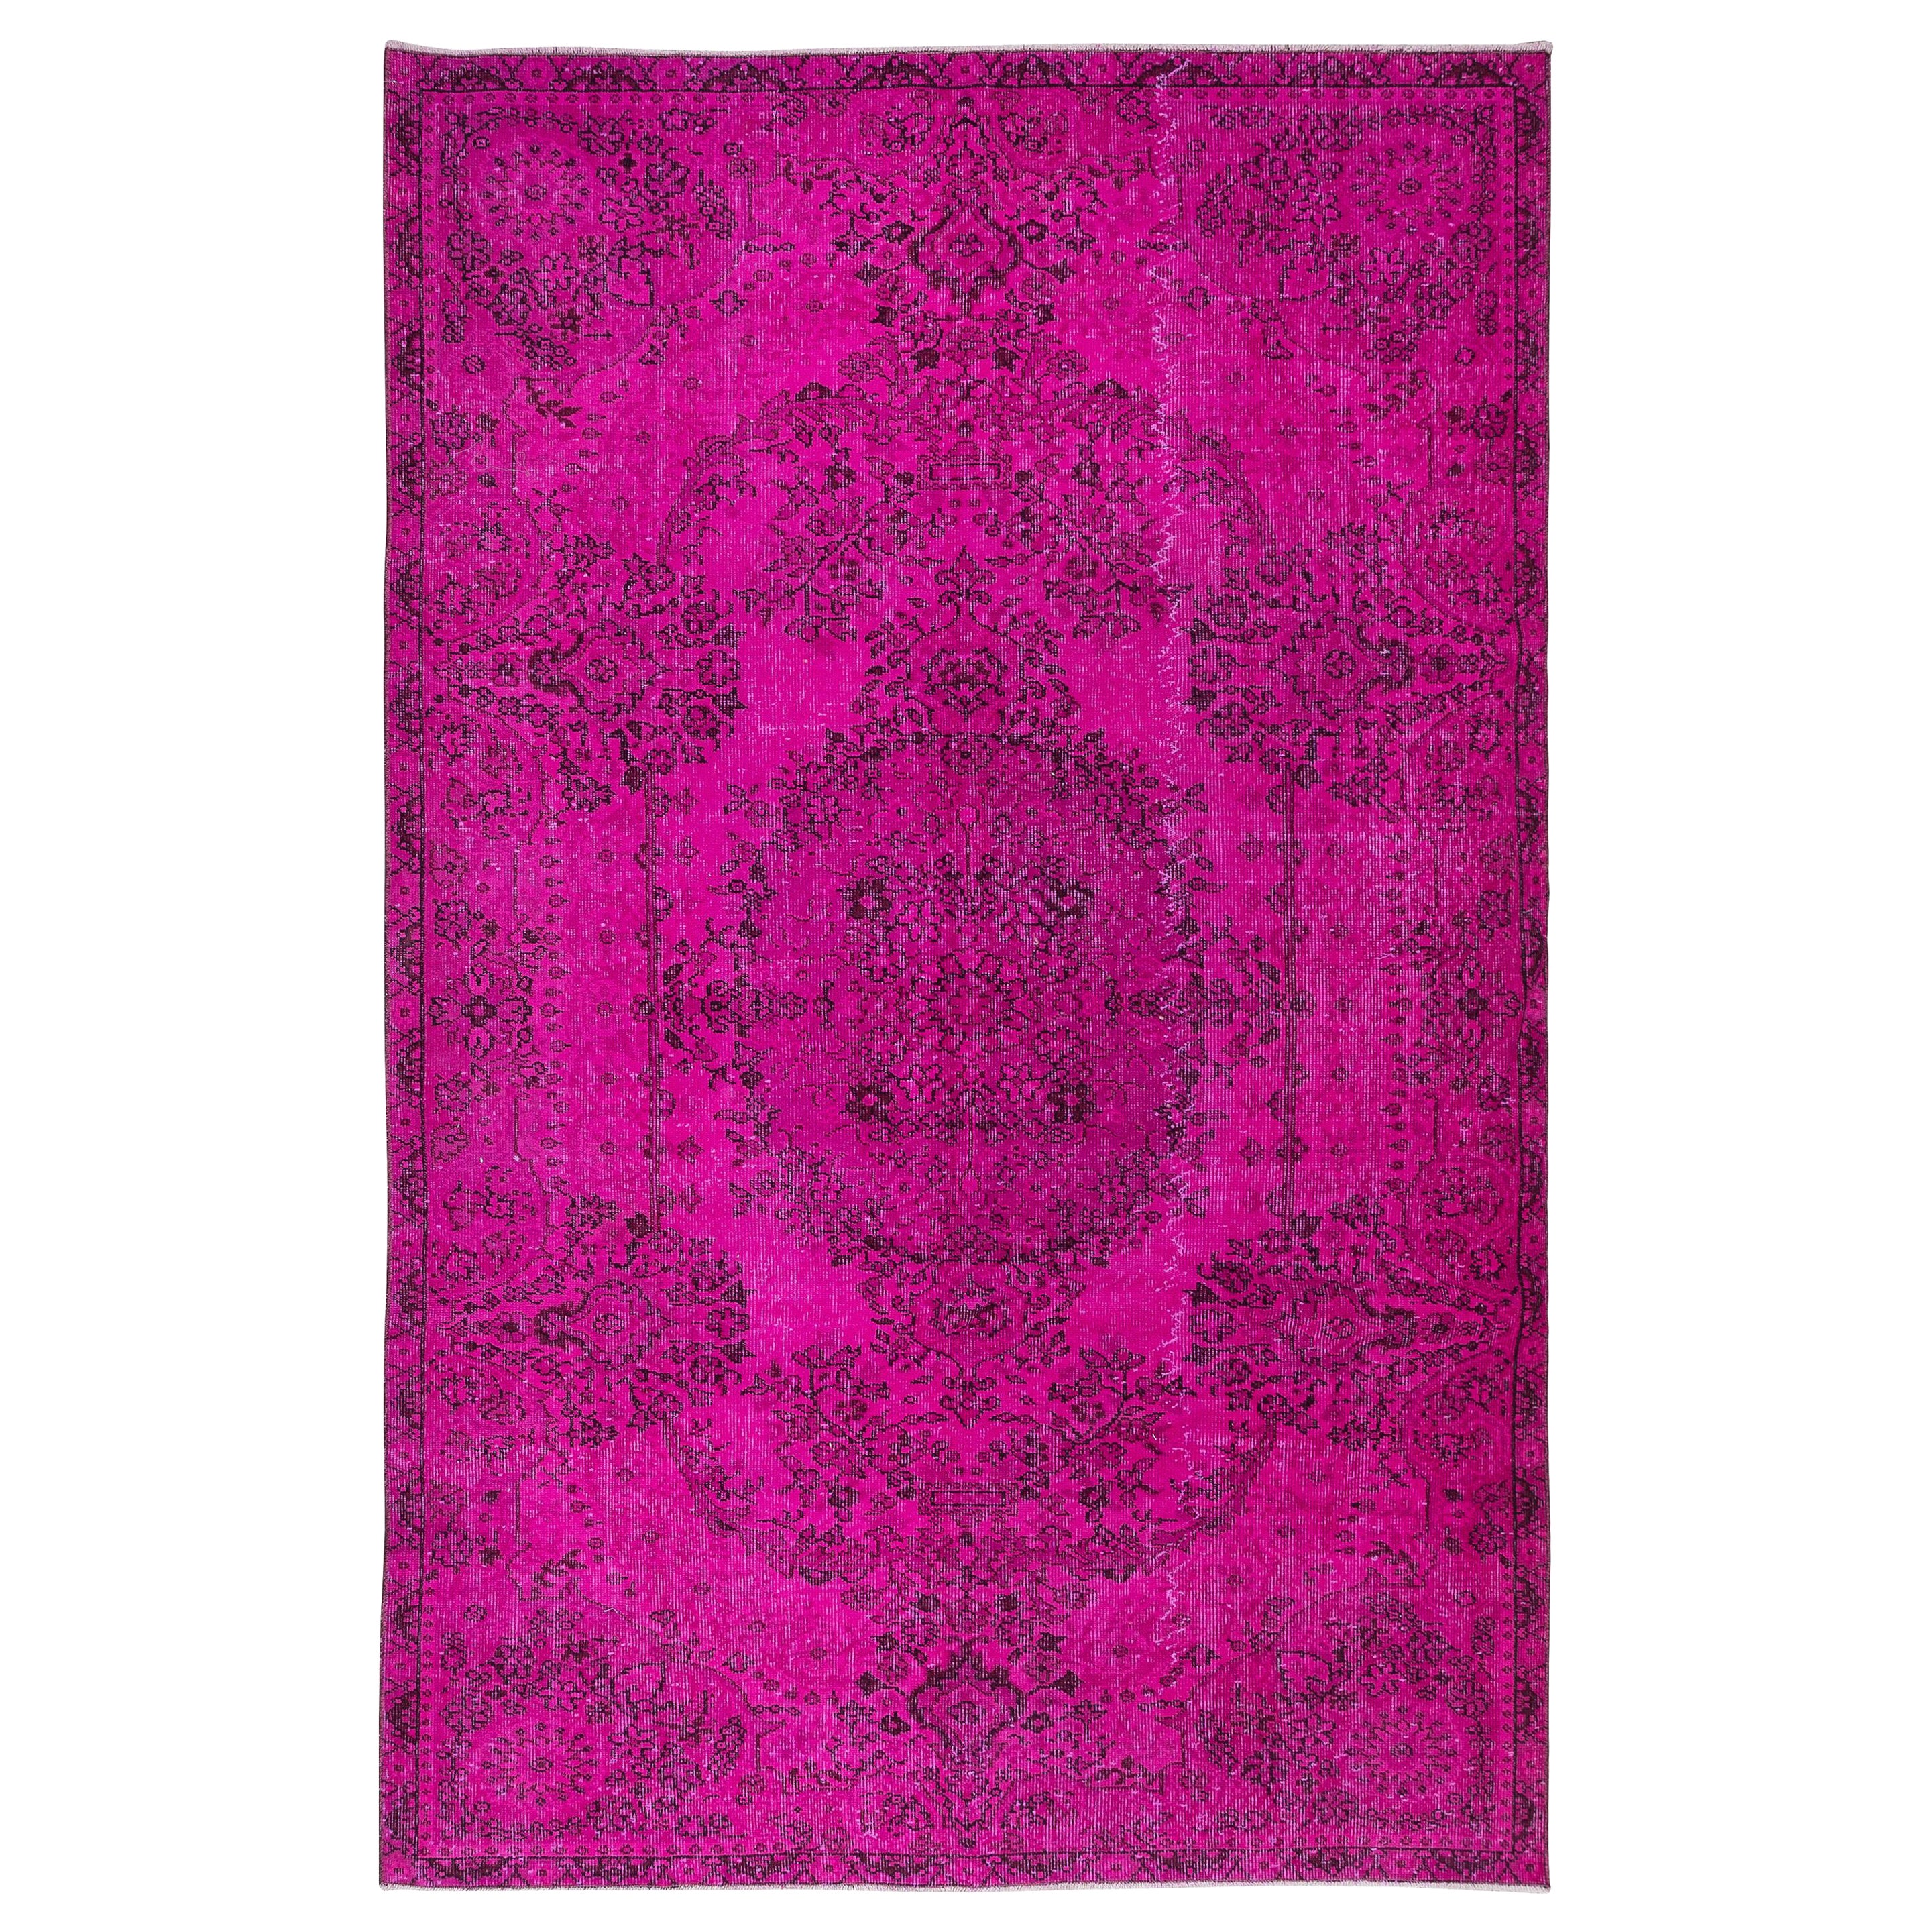 6.4x9.7 Ft Hot Pink Handmade Turkish Wool Area Rug for Modern Interiors For Sale